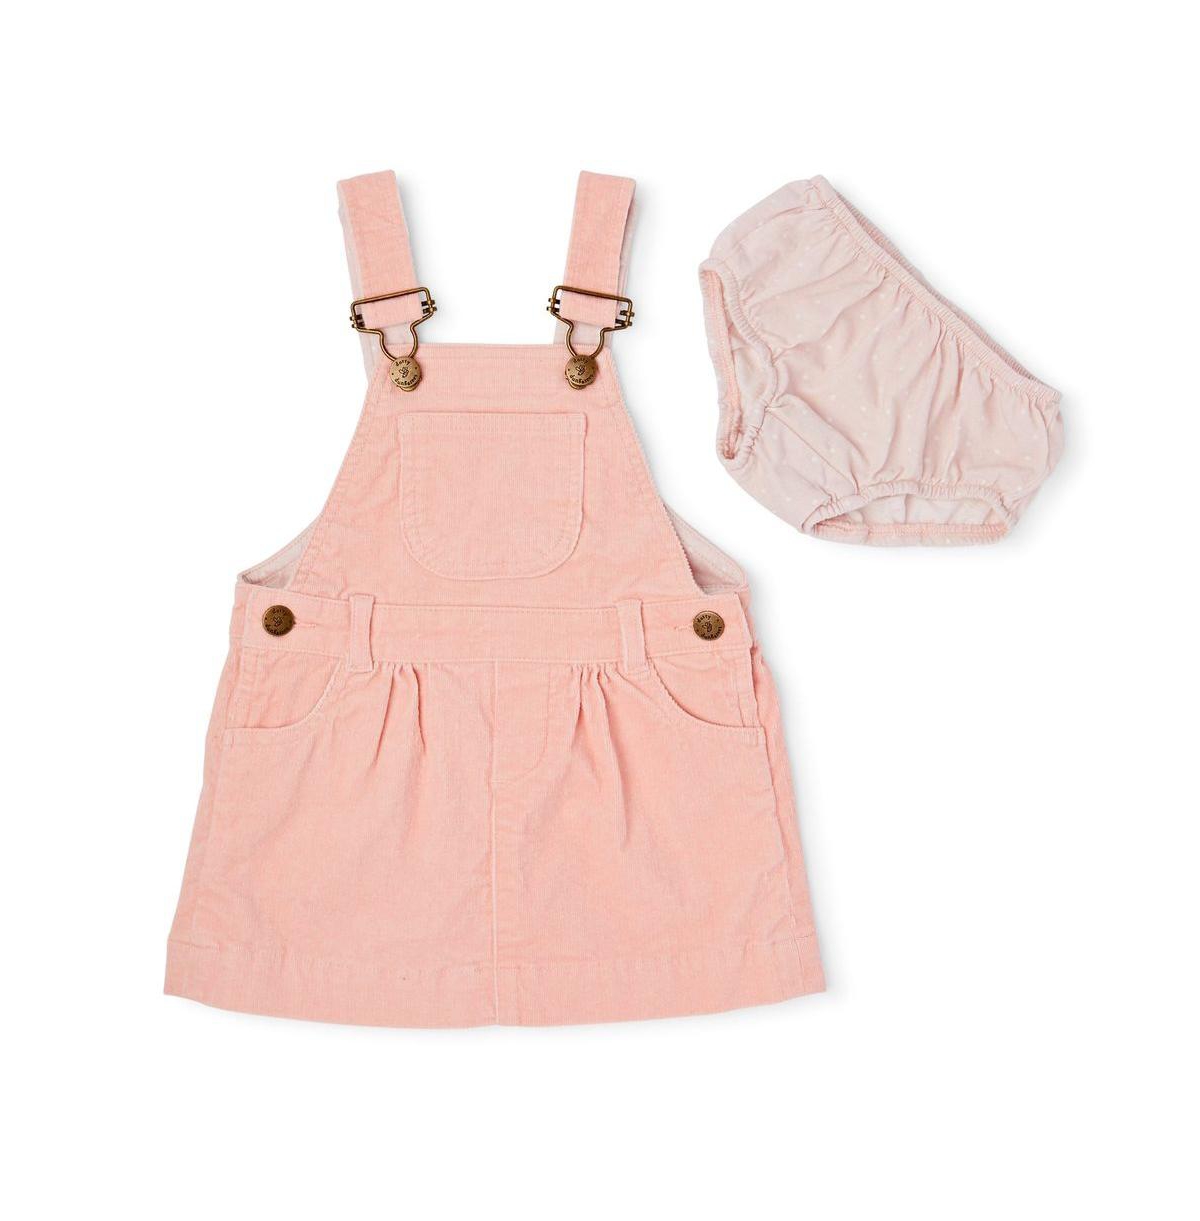 Dotty Dungarees Child Girl Corduroy Overall Dress In Old Rose Pink